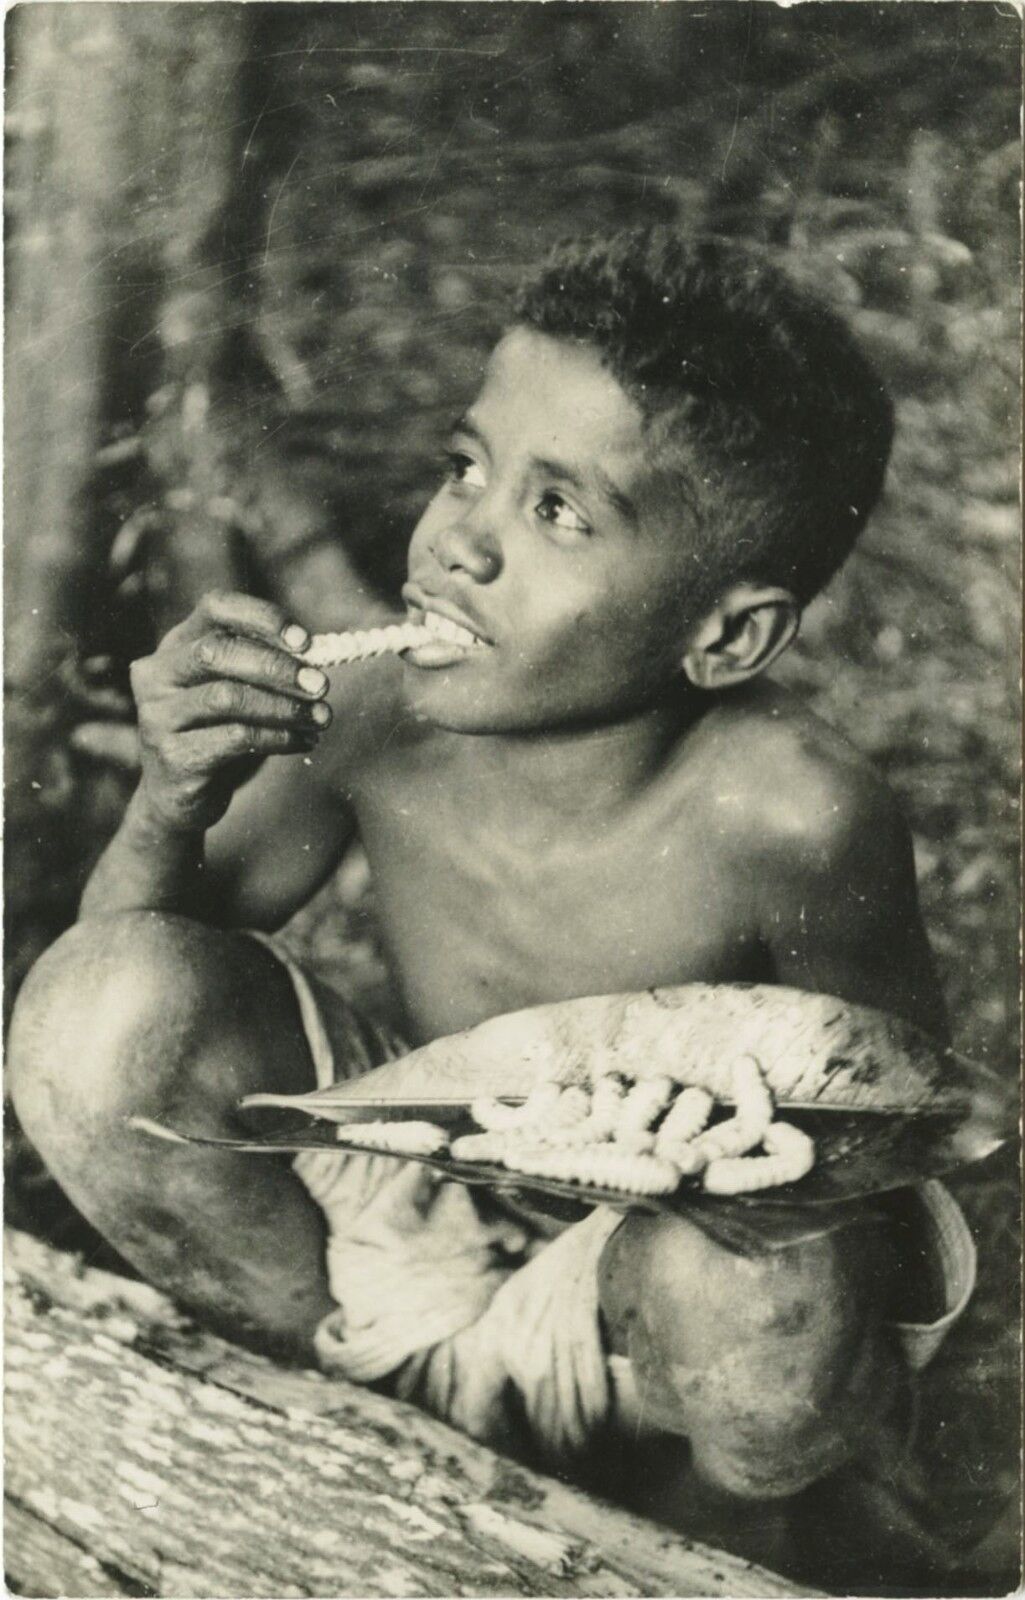 CHARMING AFRICAN BOY ENJOYS EATING WITH BANANA LEAVES & VINTAGE PHOTO POSTCARD